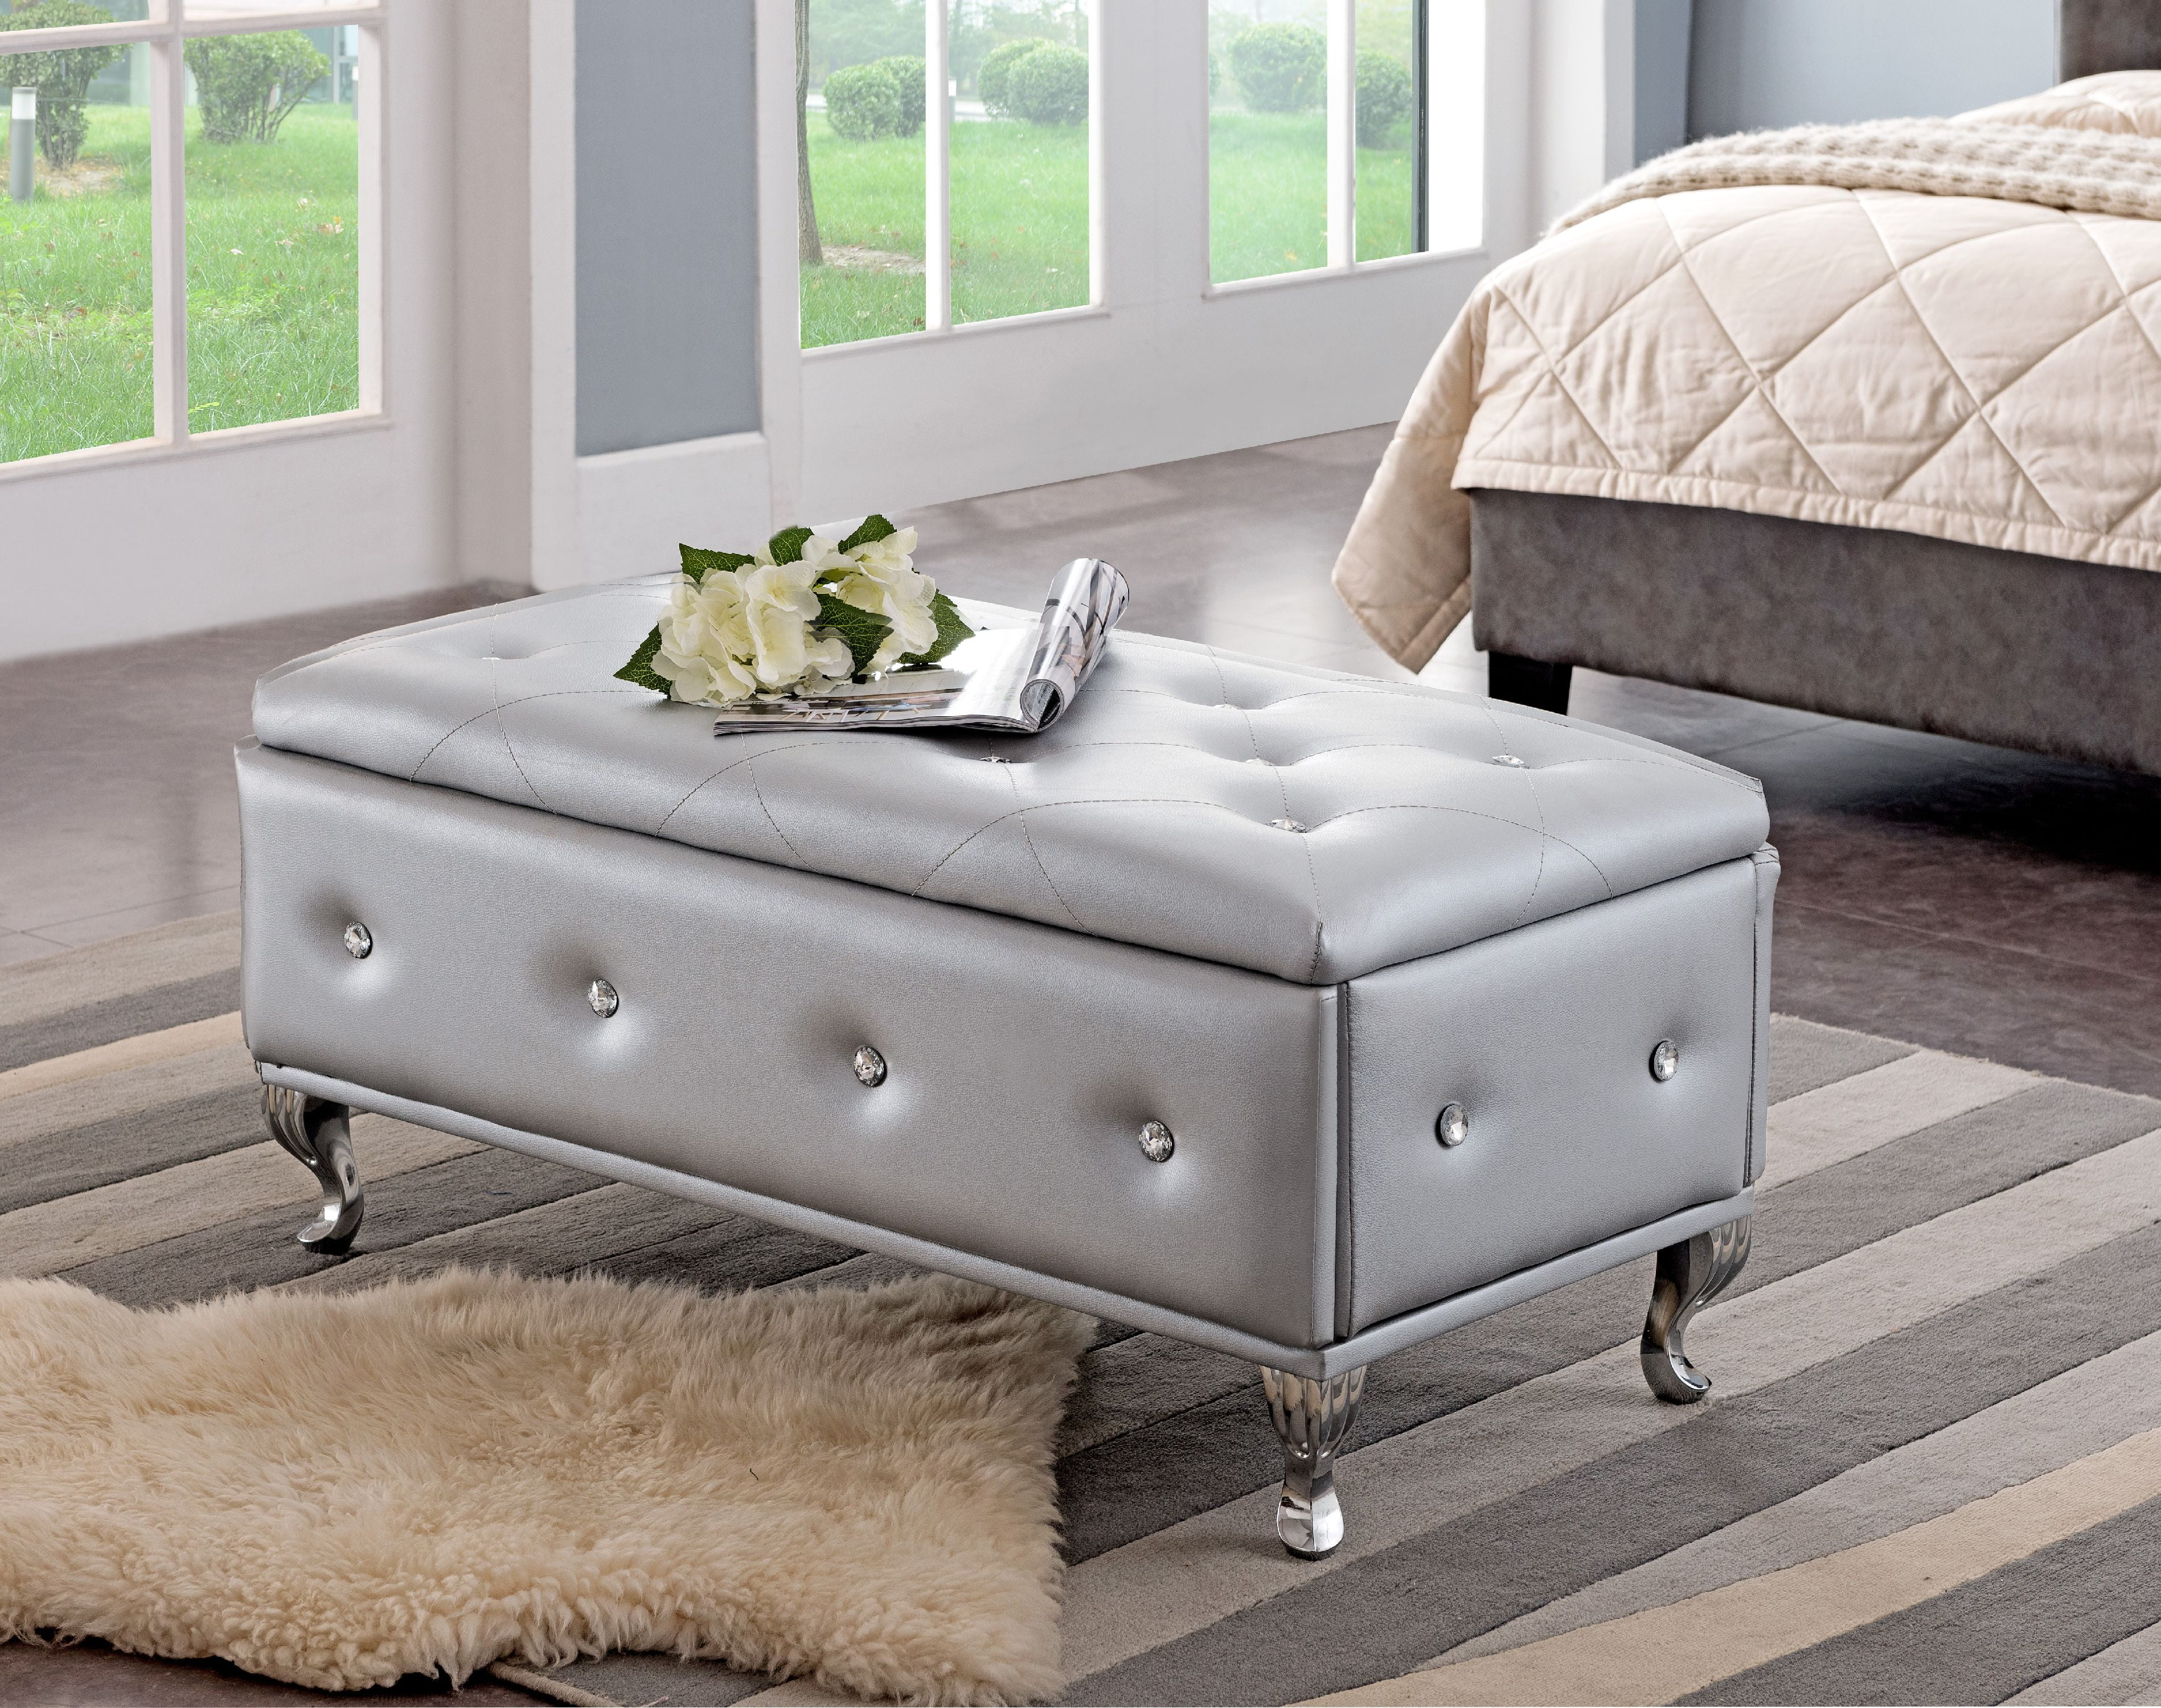 Jane Silver Upholstered Faux Leather, Leather Storage Ottoman Bench Tufted